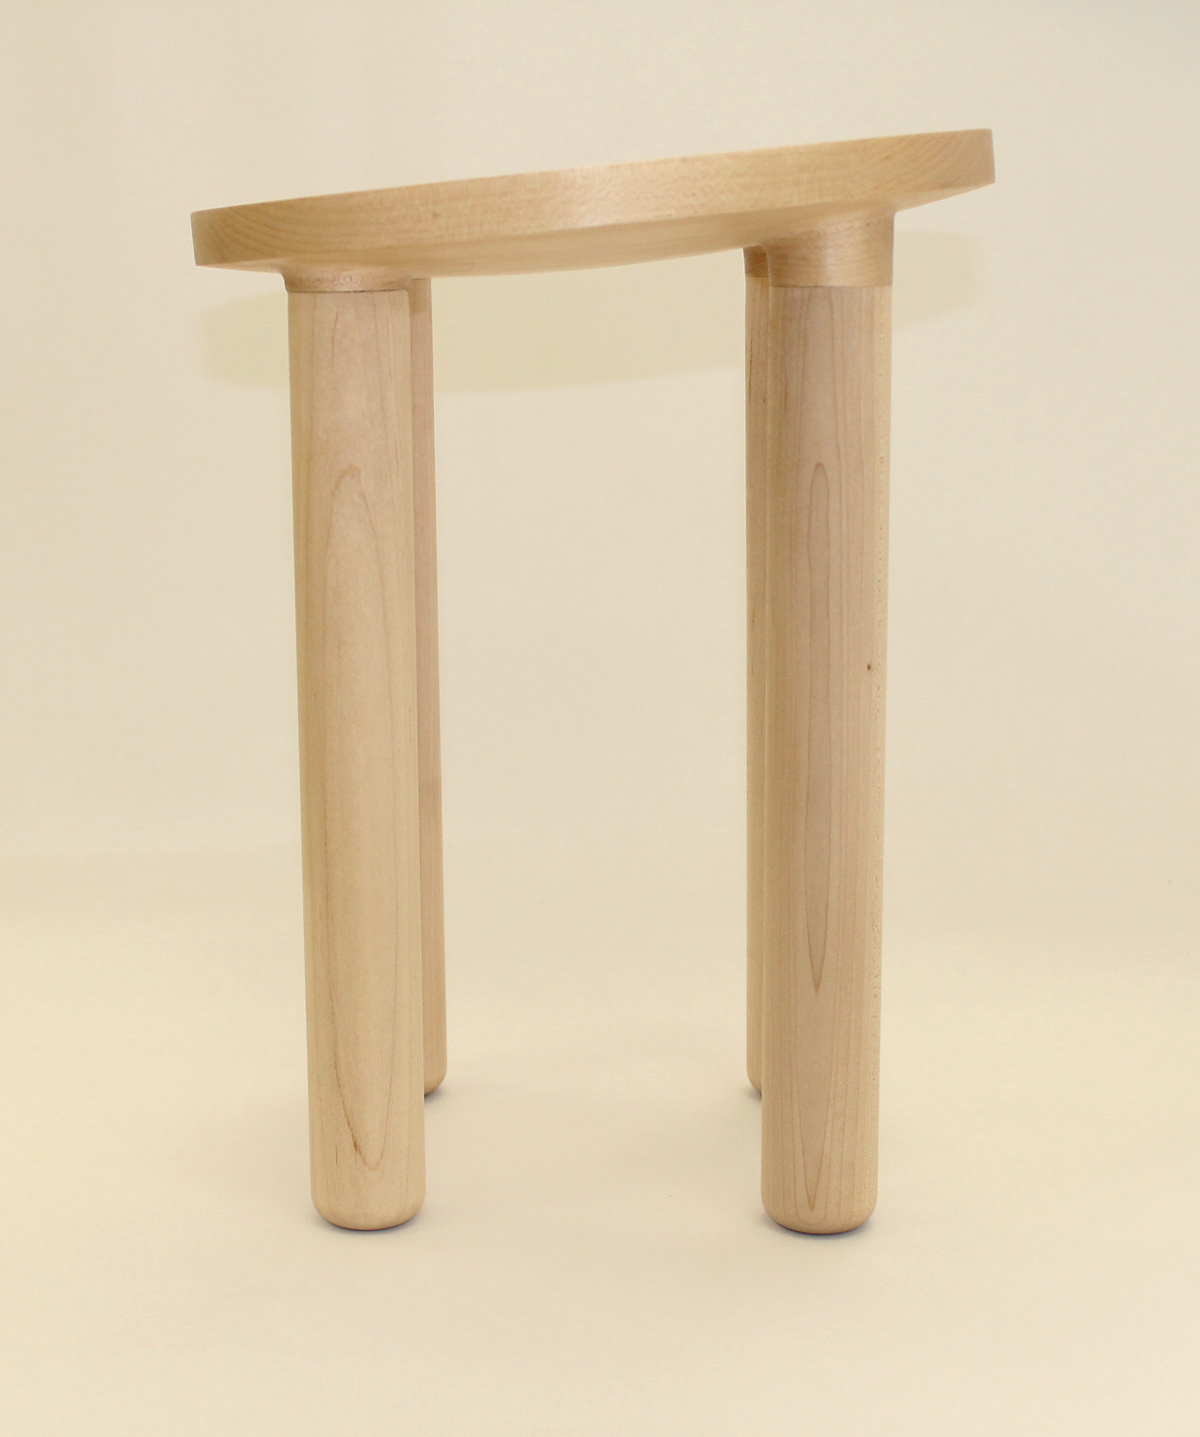 muji Super Normal stool cnc risd Solidworks CNC lathe brand idenity brand research 3D Drawing small stool